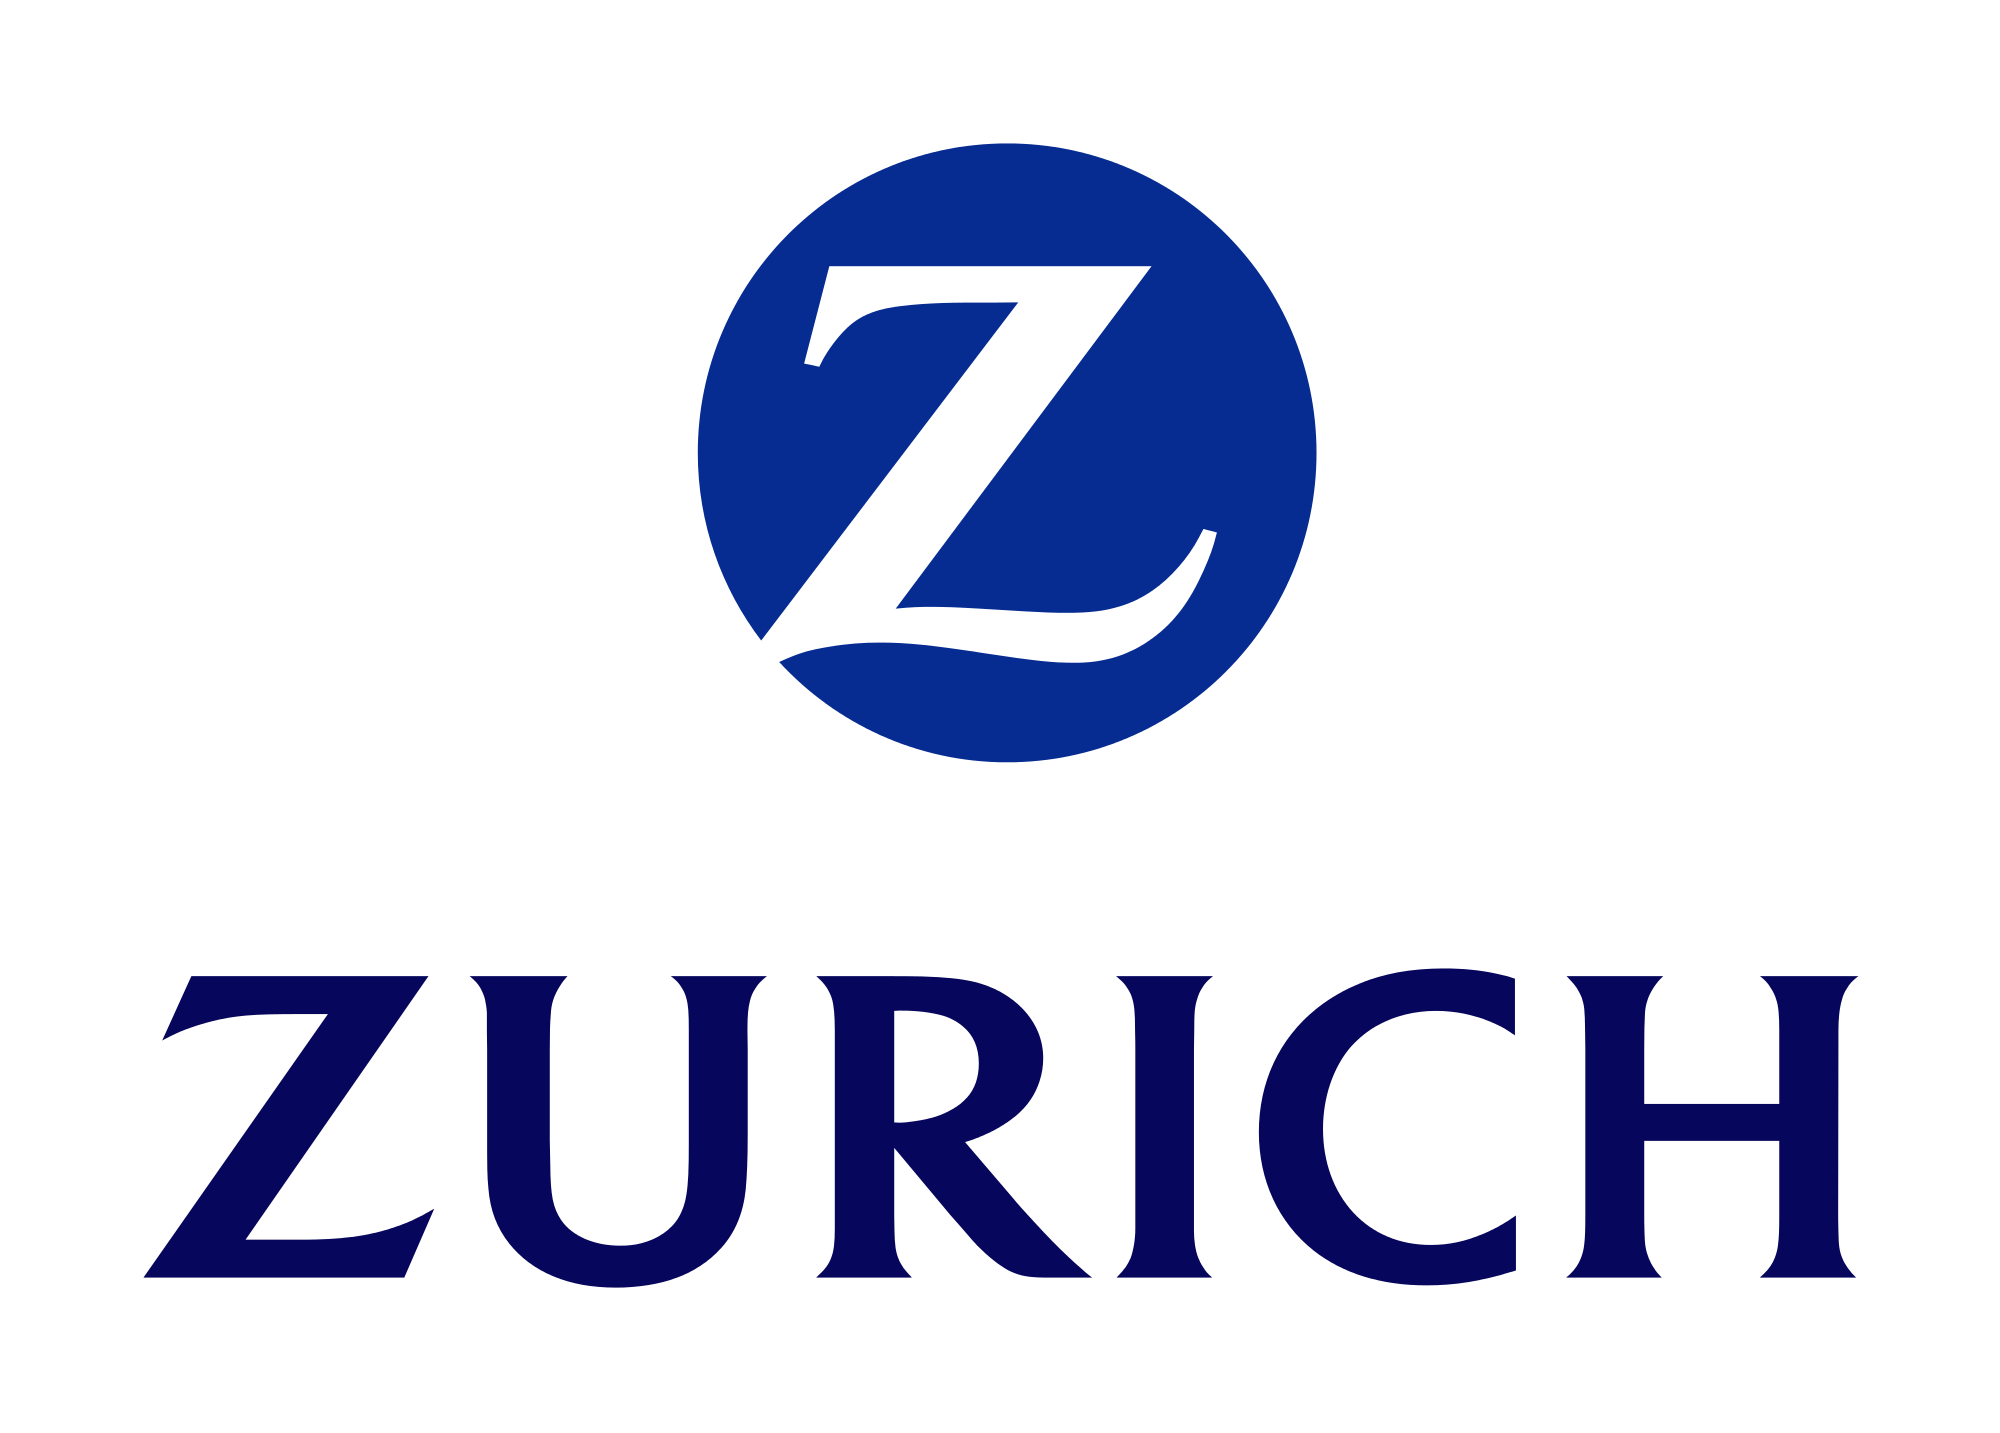 Zurich frees $1.2bn of capital with sale of $9.5bn Italian life & pensions back book